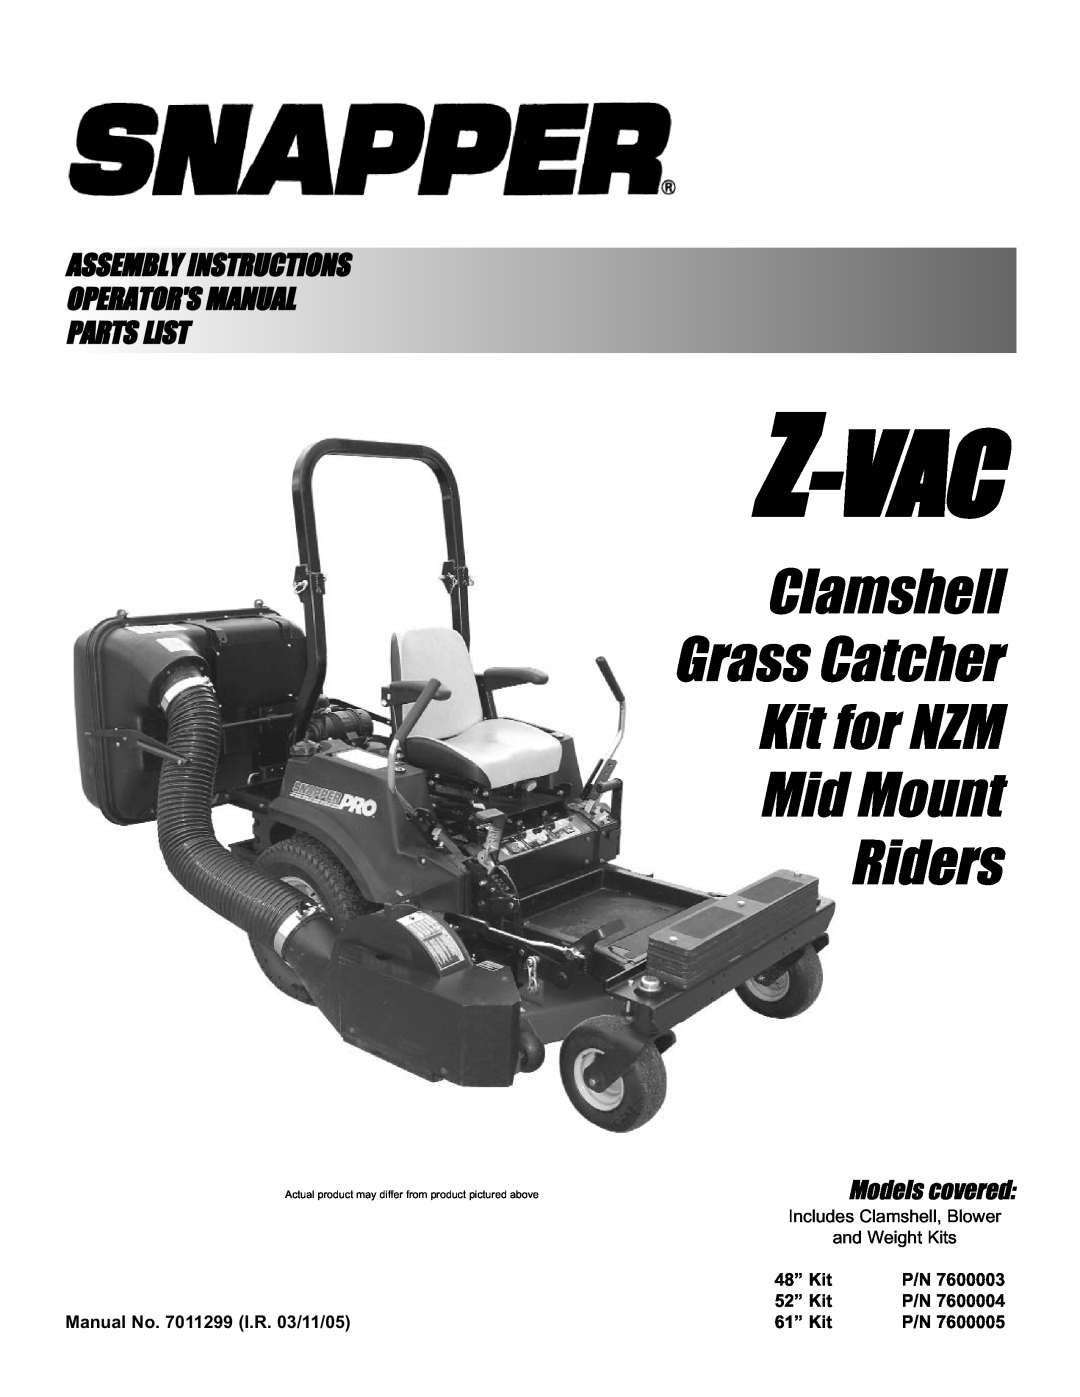 Snapper 7600004 manual Z-Vac, Clamshell Grass Catcher Kit for NZM Mid Mount Riders, Models covered, 48” Kit, 52” Kit 